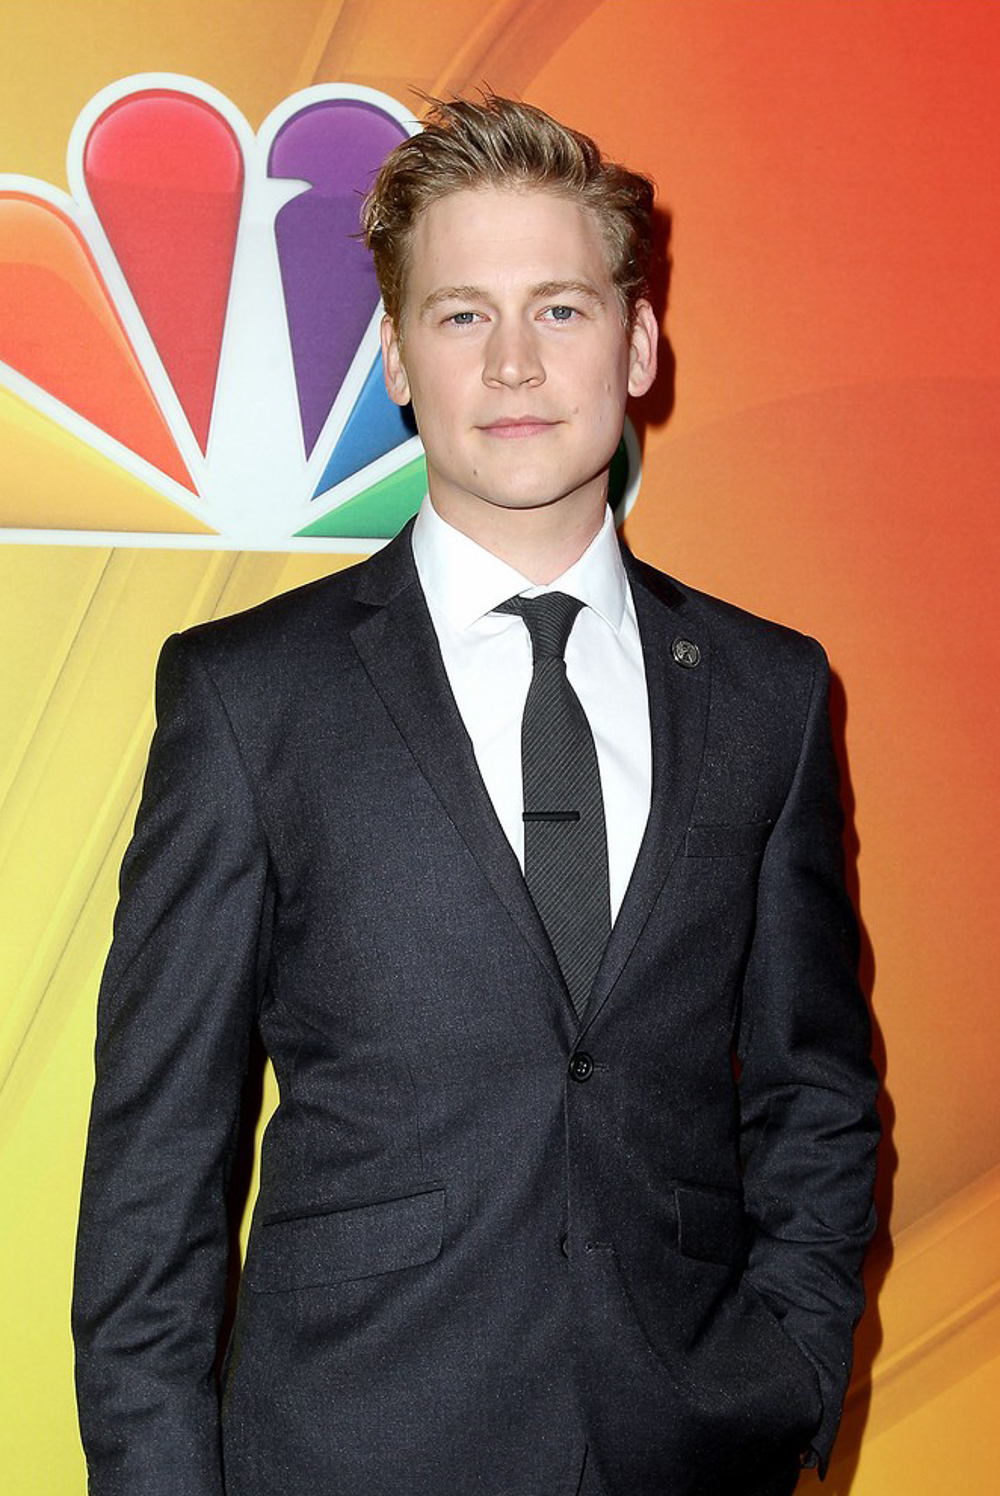 Gavin Stenhouse attends the red carpet at the 2014 NBC Upfront Presentation held at the Jacob Javits Center on Monday morning (May 12) in New York City.